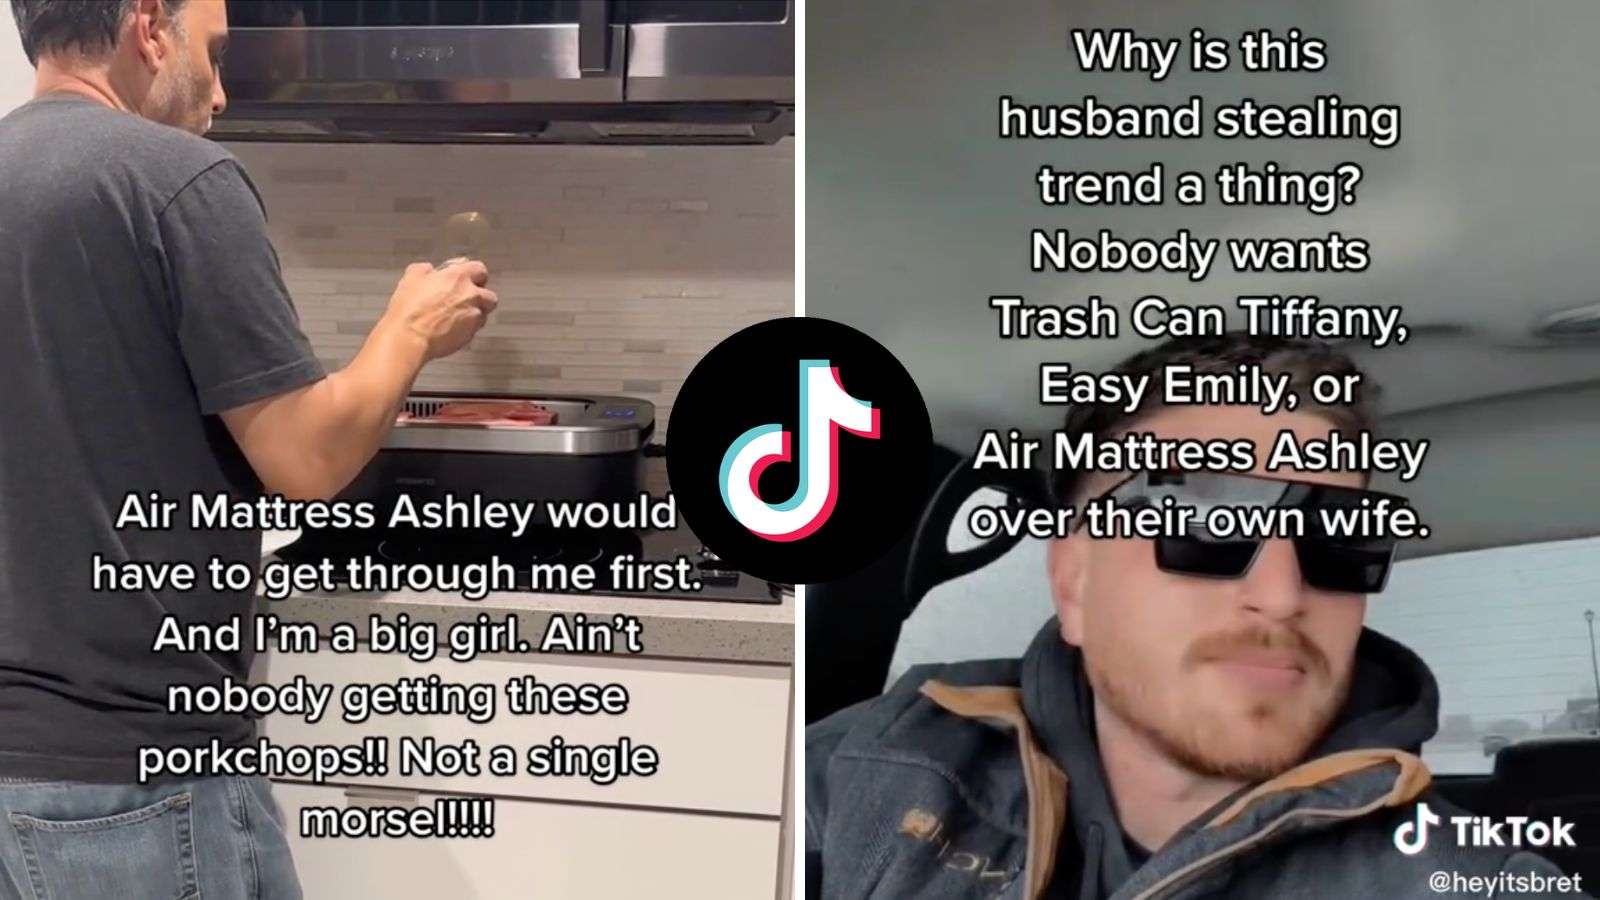 What is the viral 'air mattress Ashley' trend on TikTok?